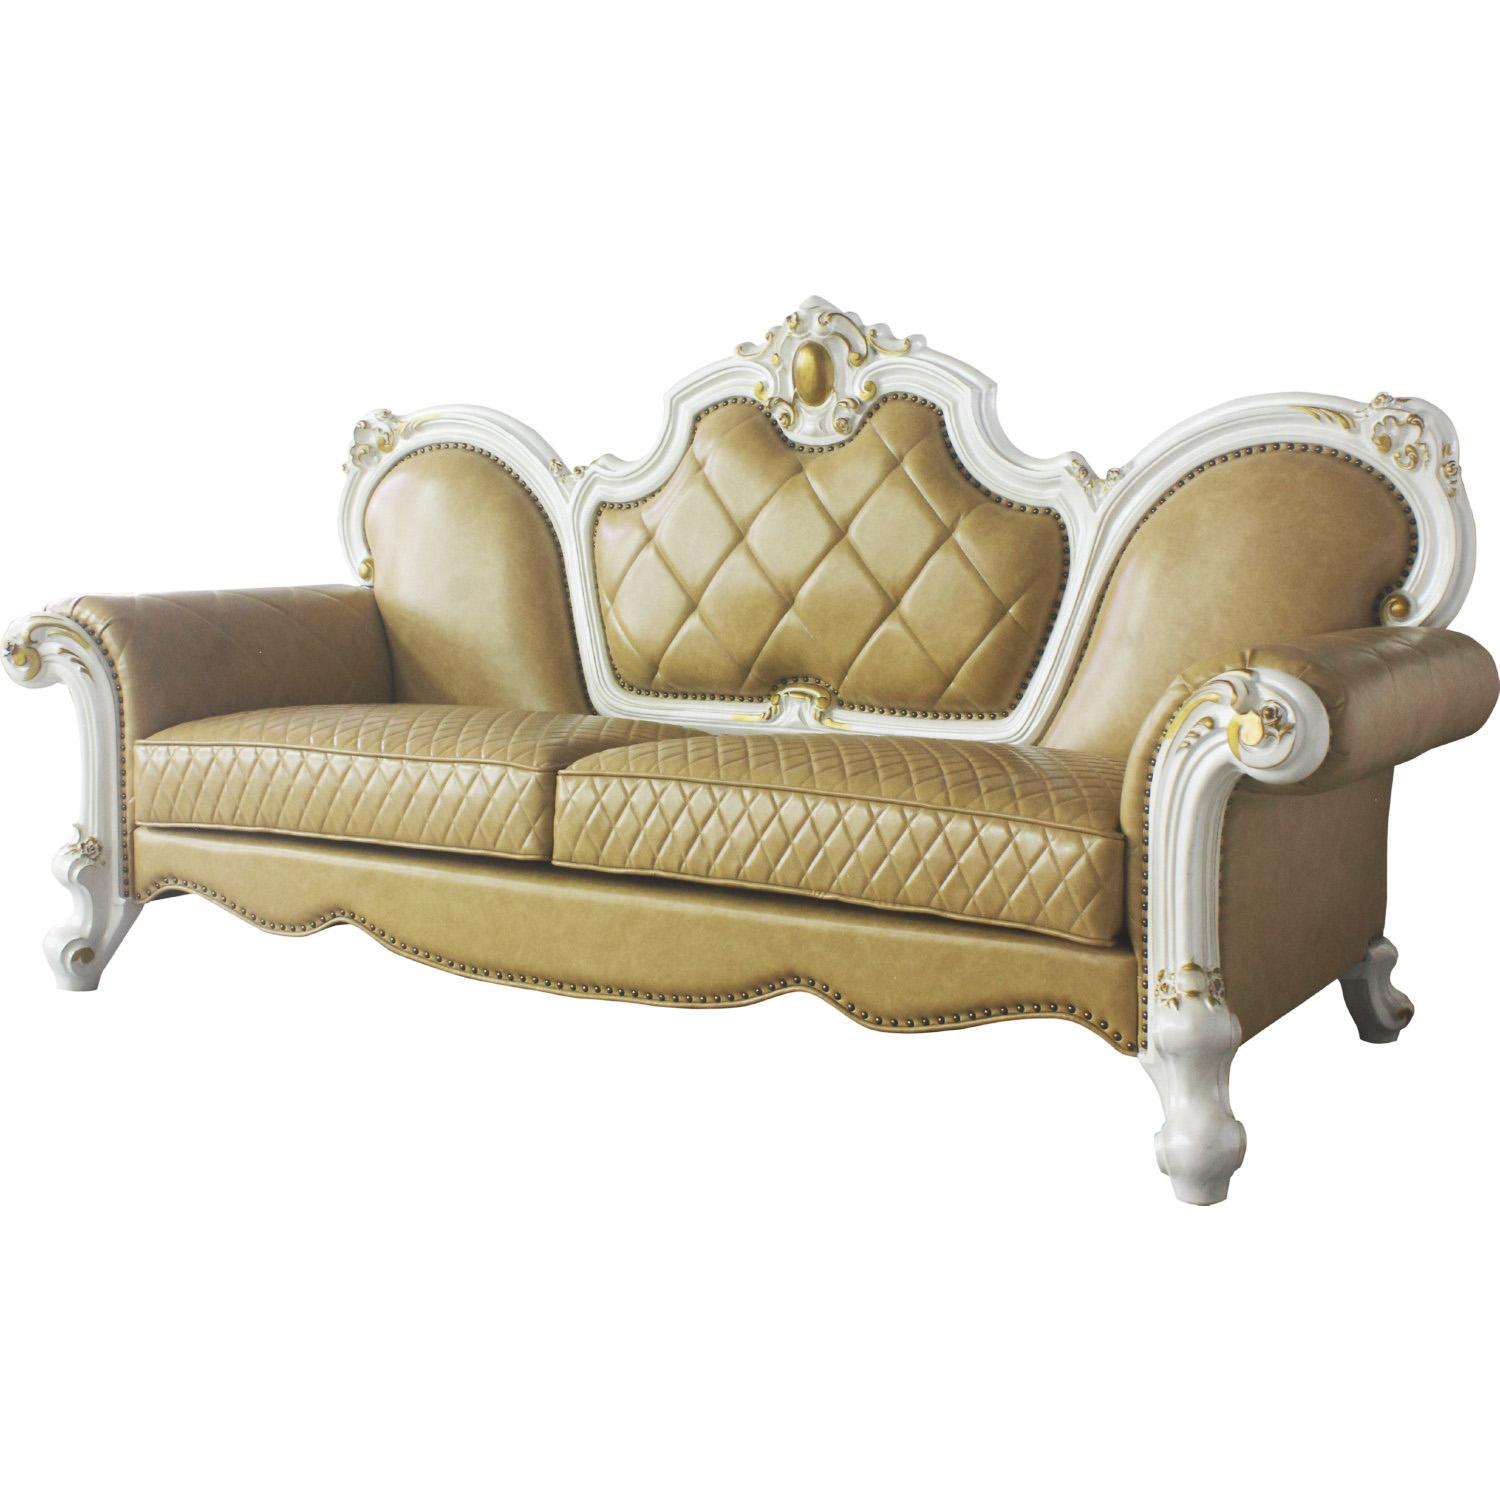 Classic, Traditional Sofa Picardy 58210 58210 Picardy in Pearl, Antique, Yellow PU